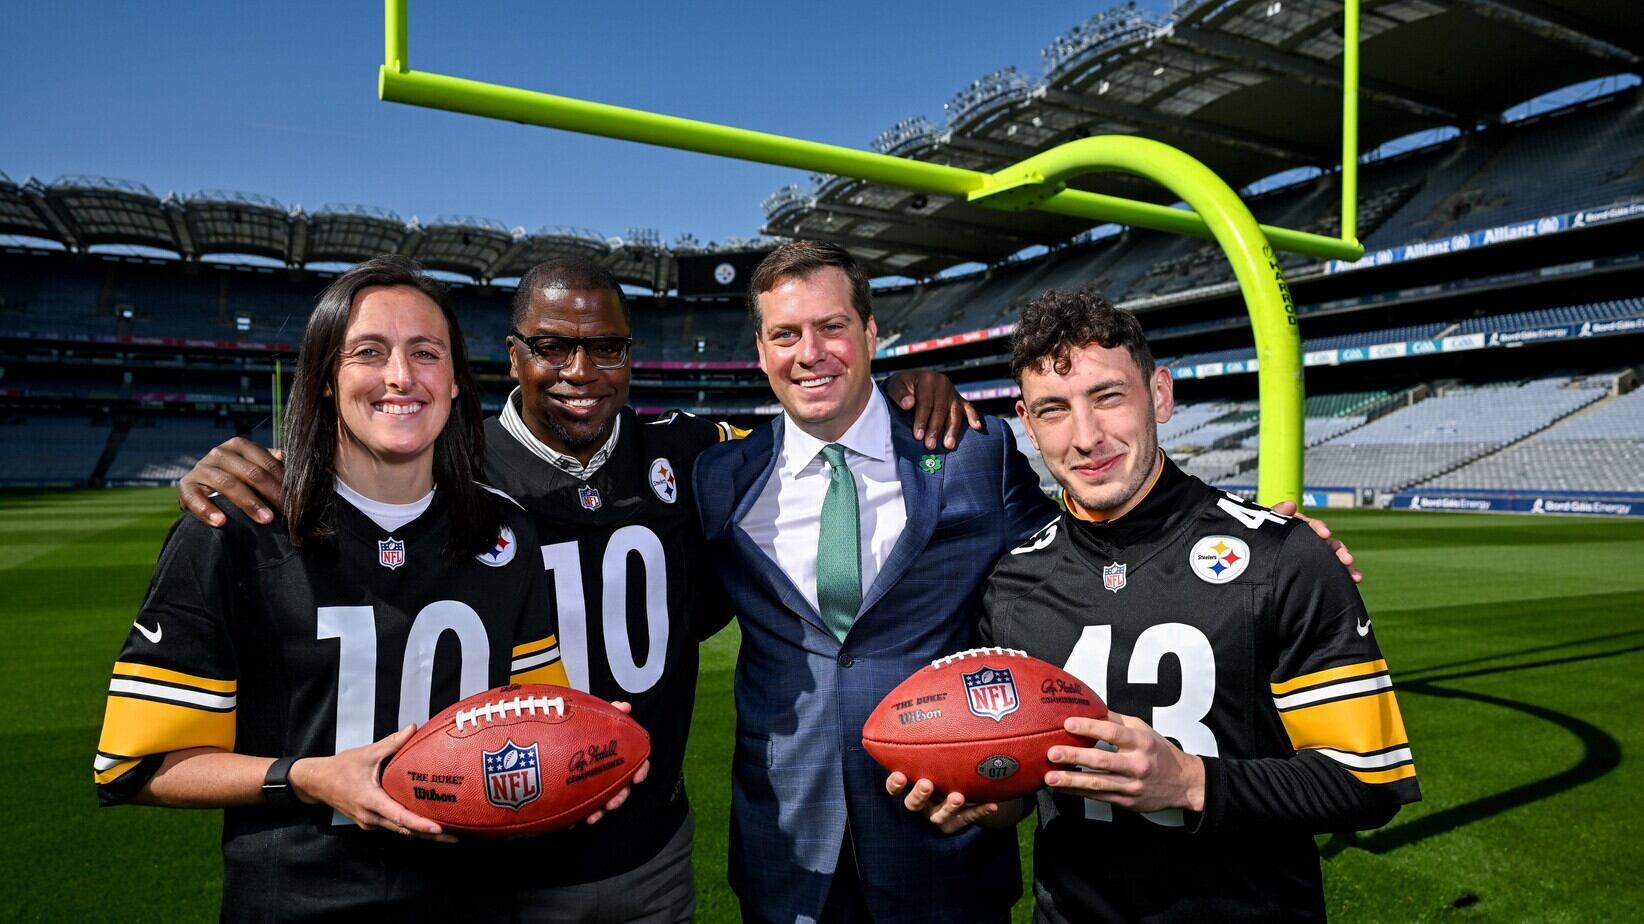 The Pittsburgh Steelers made a welcome return to Croke Park today, where they played in the first ever NFL game in Ireland in 1997. The Steelers plan to grow their fanbase and the game of American Football in Ireland as part of the NFL’s ‘Global Markets Program’. Pictured is former Pittsburgh Steelers quarterback Kordell Stewart who played in 1997, with, from left, Dublin GAA legend and NFL fan Hannah Tyrrell, Pittsburgh Steelers Director of Business Development & Strategy Daniel Rooney and Kerry All-Ireland winner and Steelers fan Paudie Clifford. Photo by Brendan Moran/Sportsfile